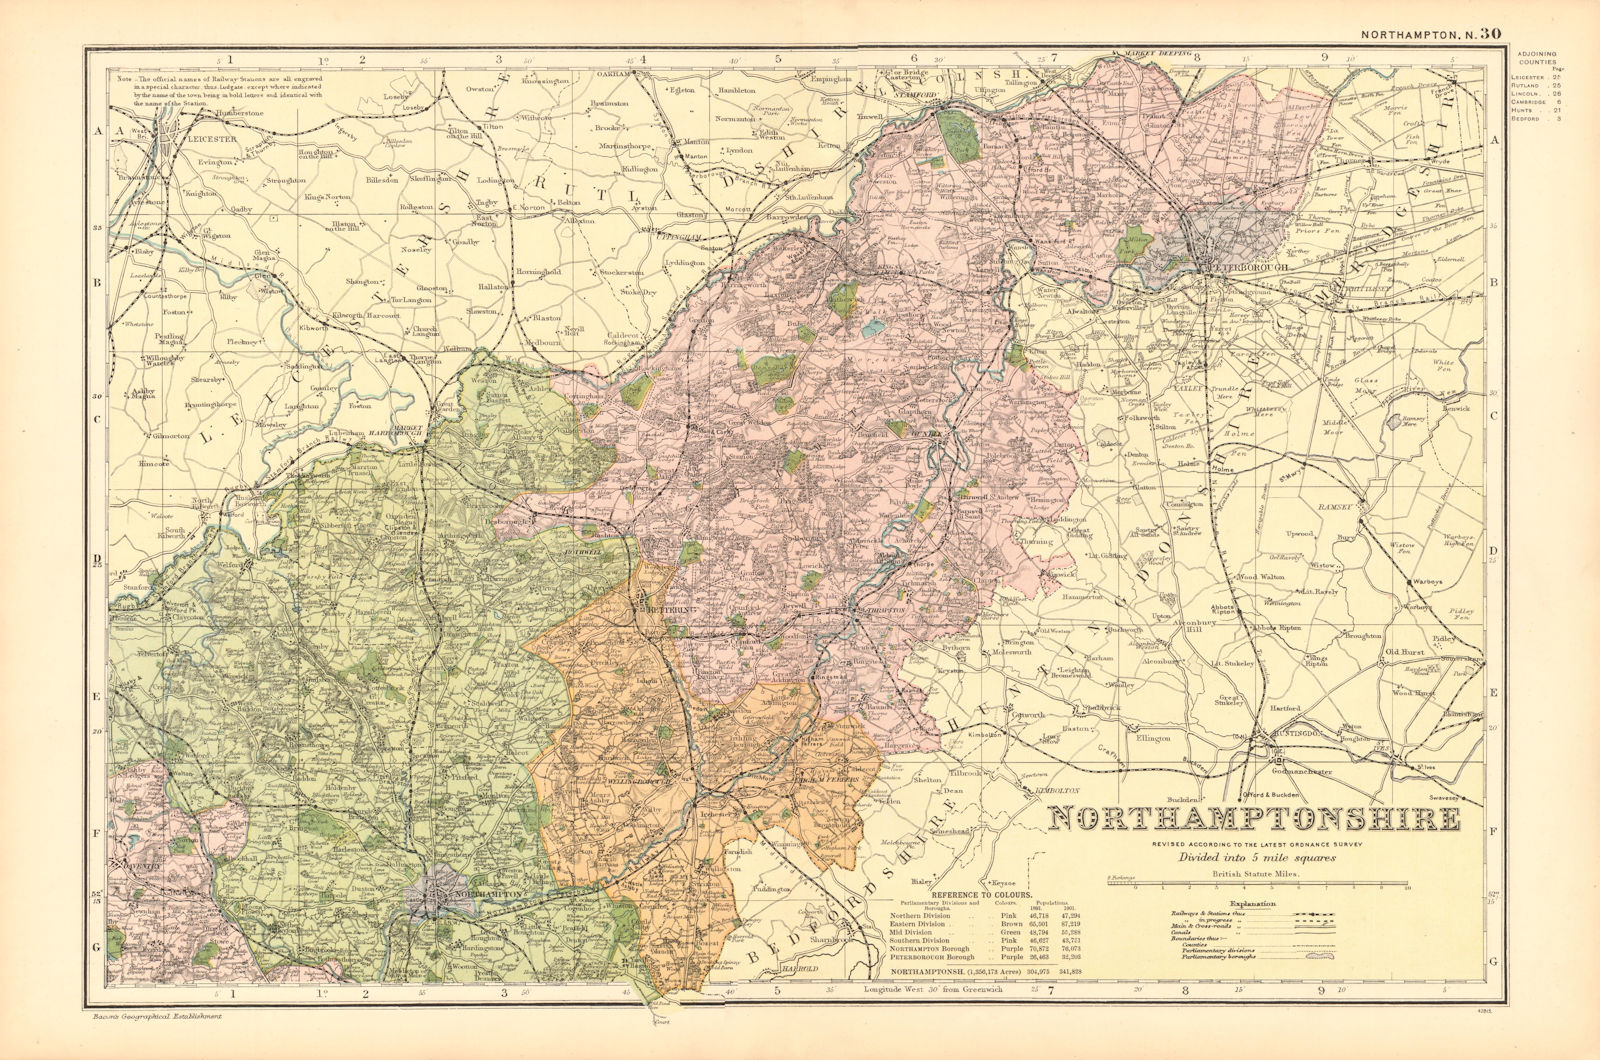 NORTHAMPTONSHIRE (NORTH). Constituencies, boroughs & parks. BACON 1904 old map